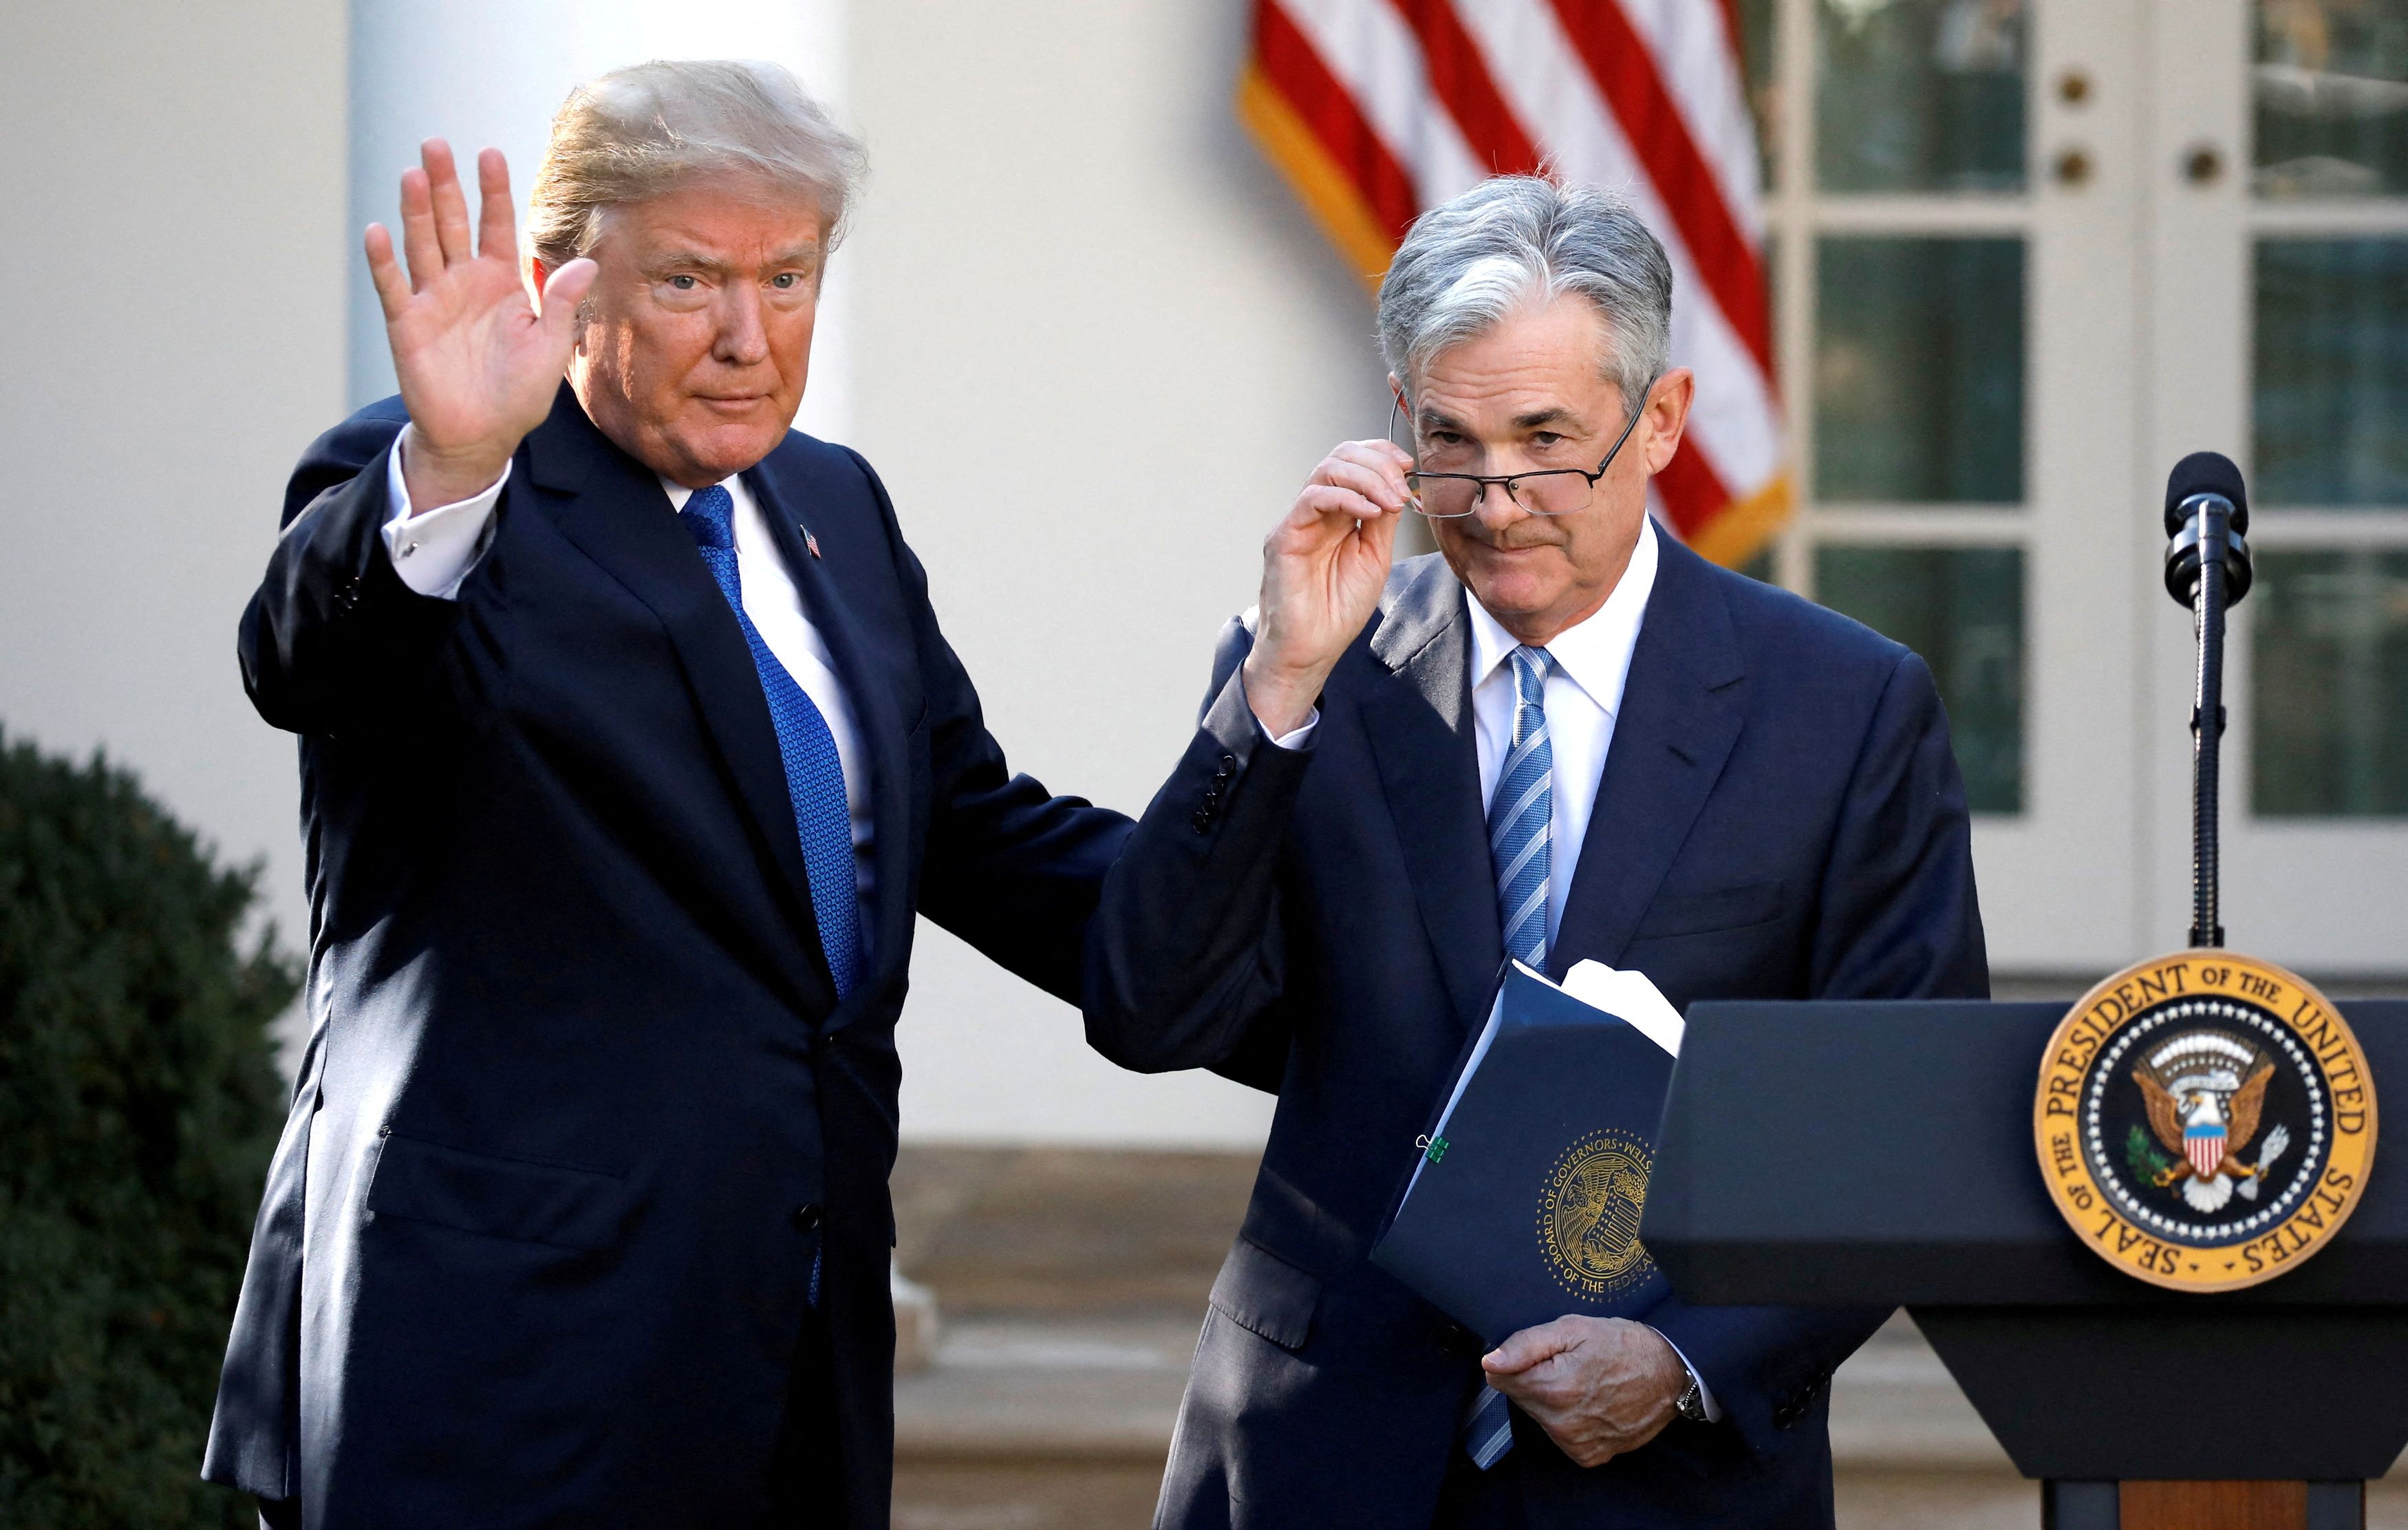 Then-U.S. President Donald Trump gestures with Jerome Powell, his nominee to become chair of the U.S. Federal Reserve at the White House in Washington, U.S., November 2, 2017. REUTERS/Carlos Barria/File Photo